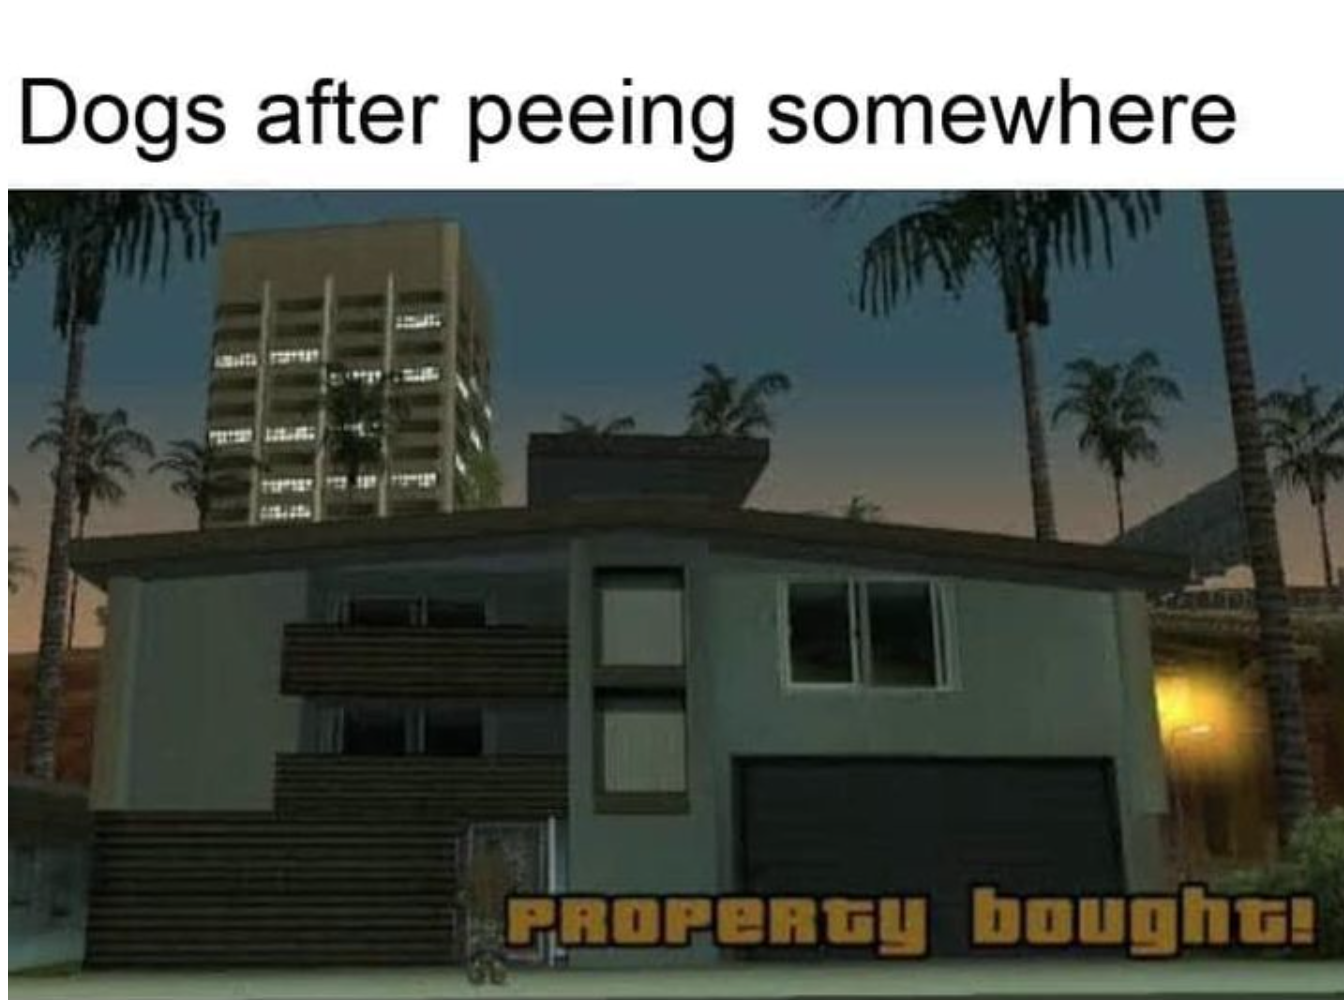 funny gaming memes - condominium - Dogs after peeing somewhere PROPERty bought!